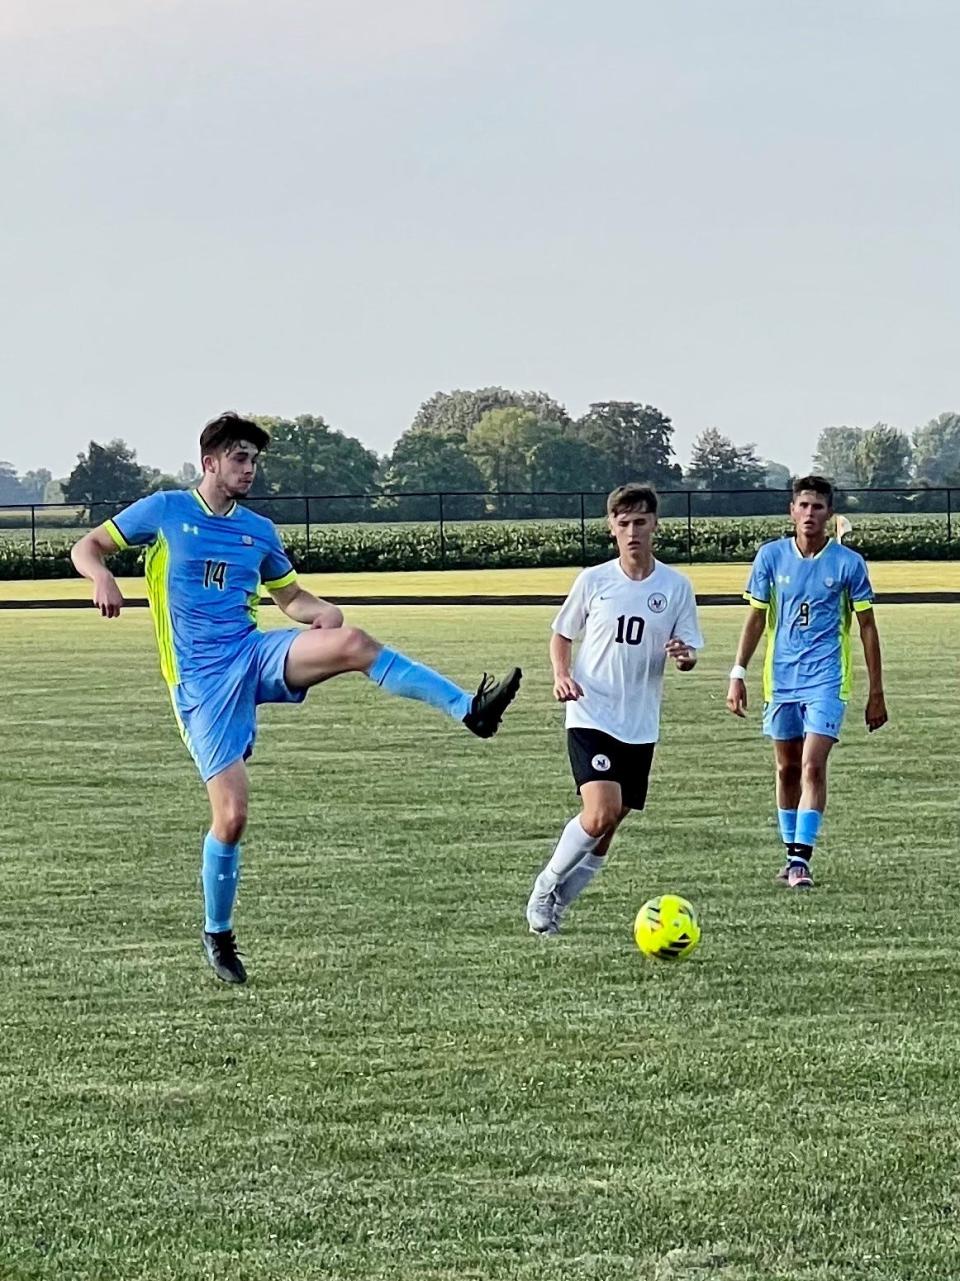 River Valley's Briley Beckley kicks the ball during a boys soccer match at home with Marion Harding as RV's Gabe Dounce and Harding's Jackson Shipley chase the play earlier this season.